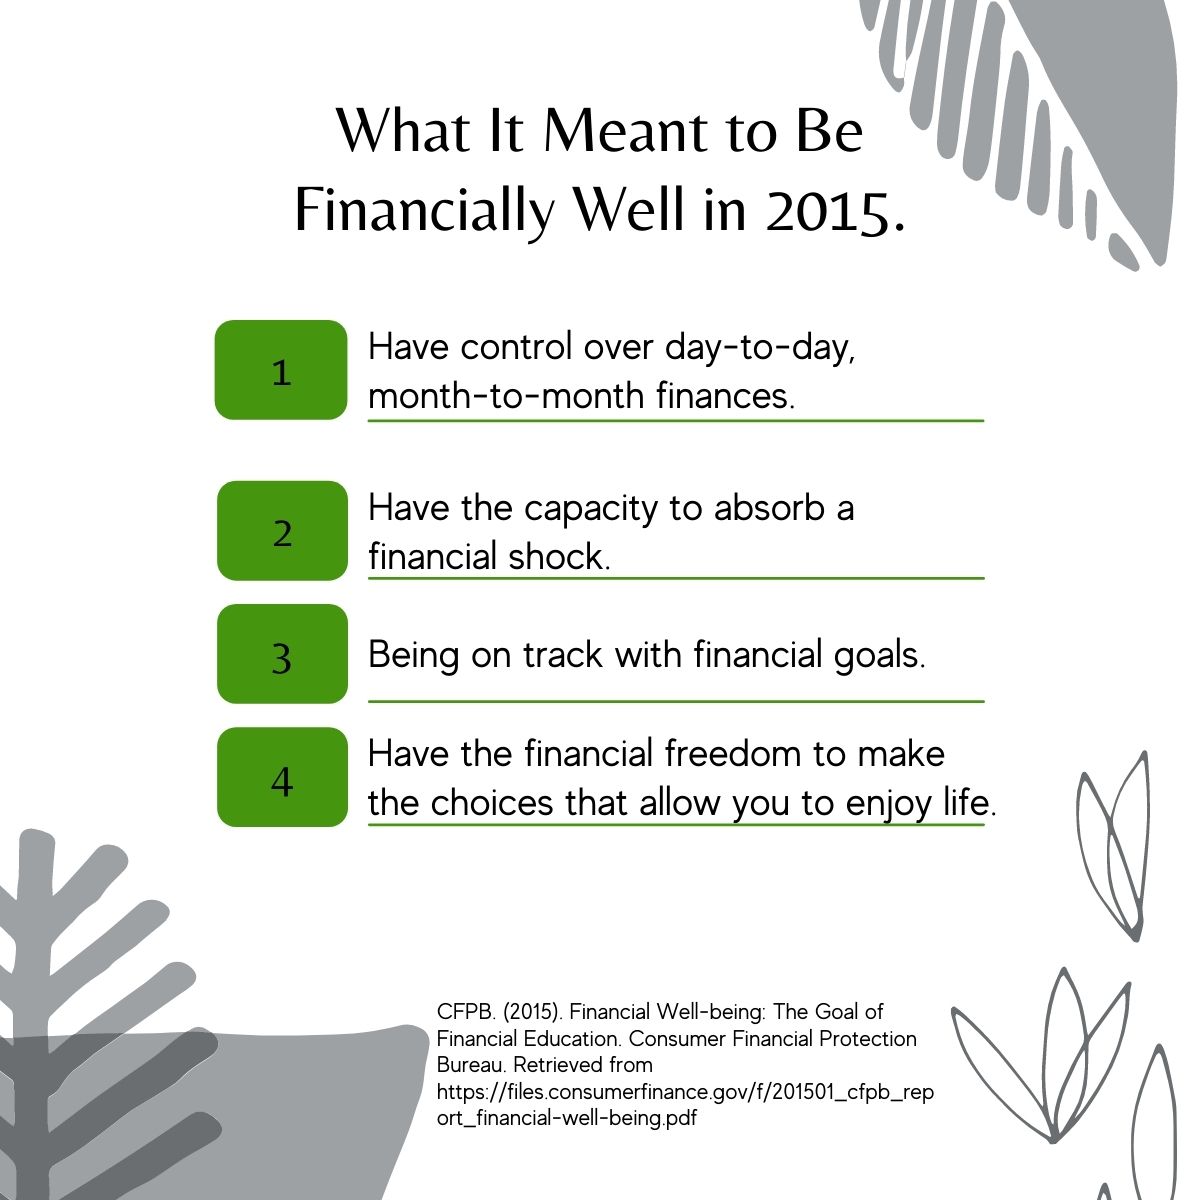 What it meant to be financially well in 2015